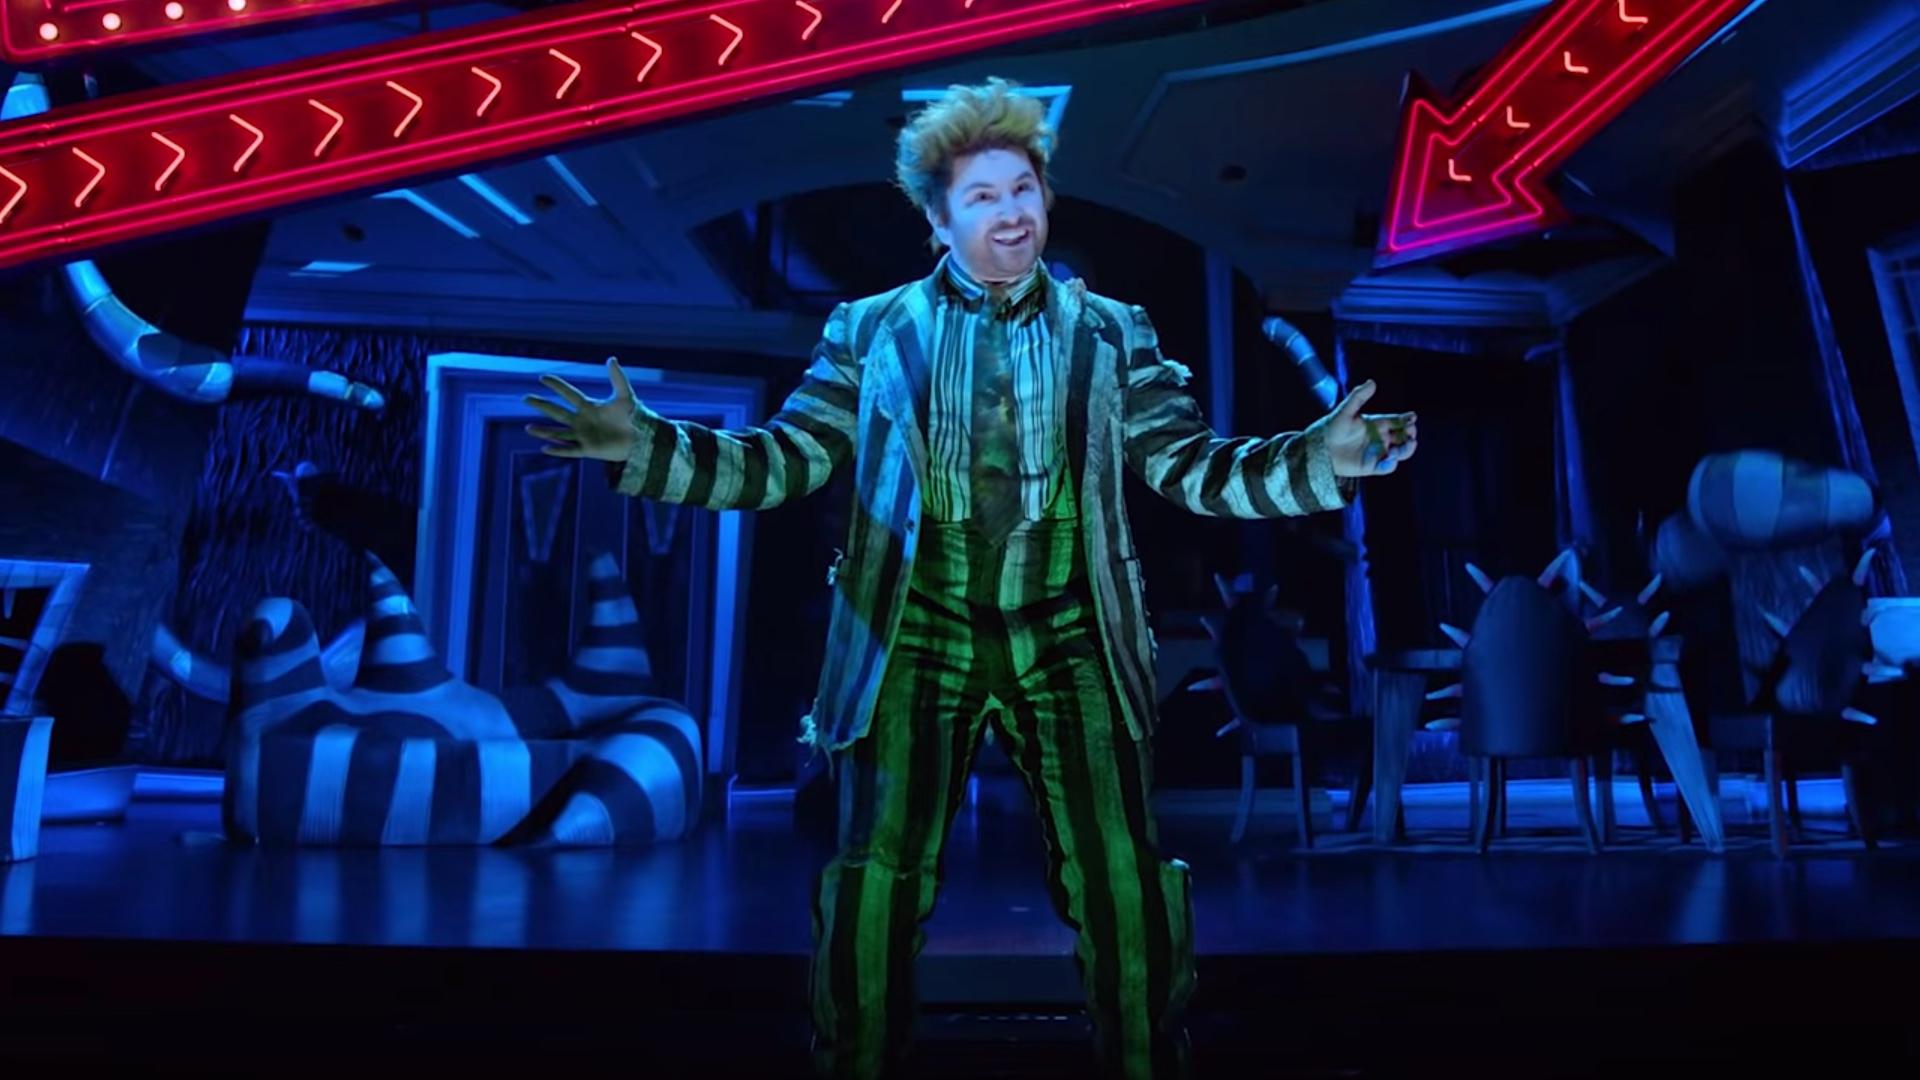 For The BEETLEJUICE Broadway Musical and Two Songs